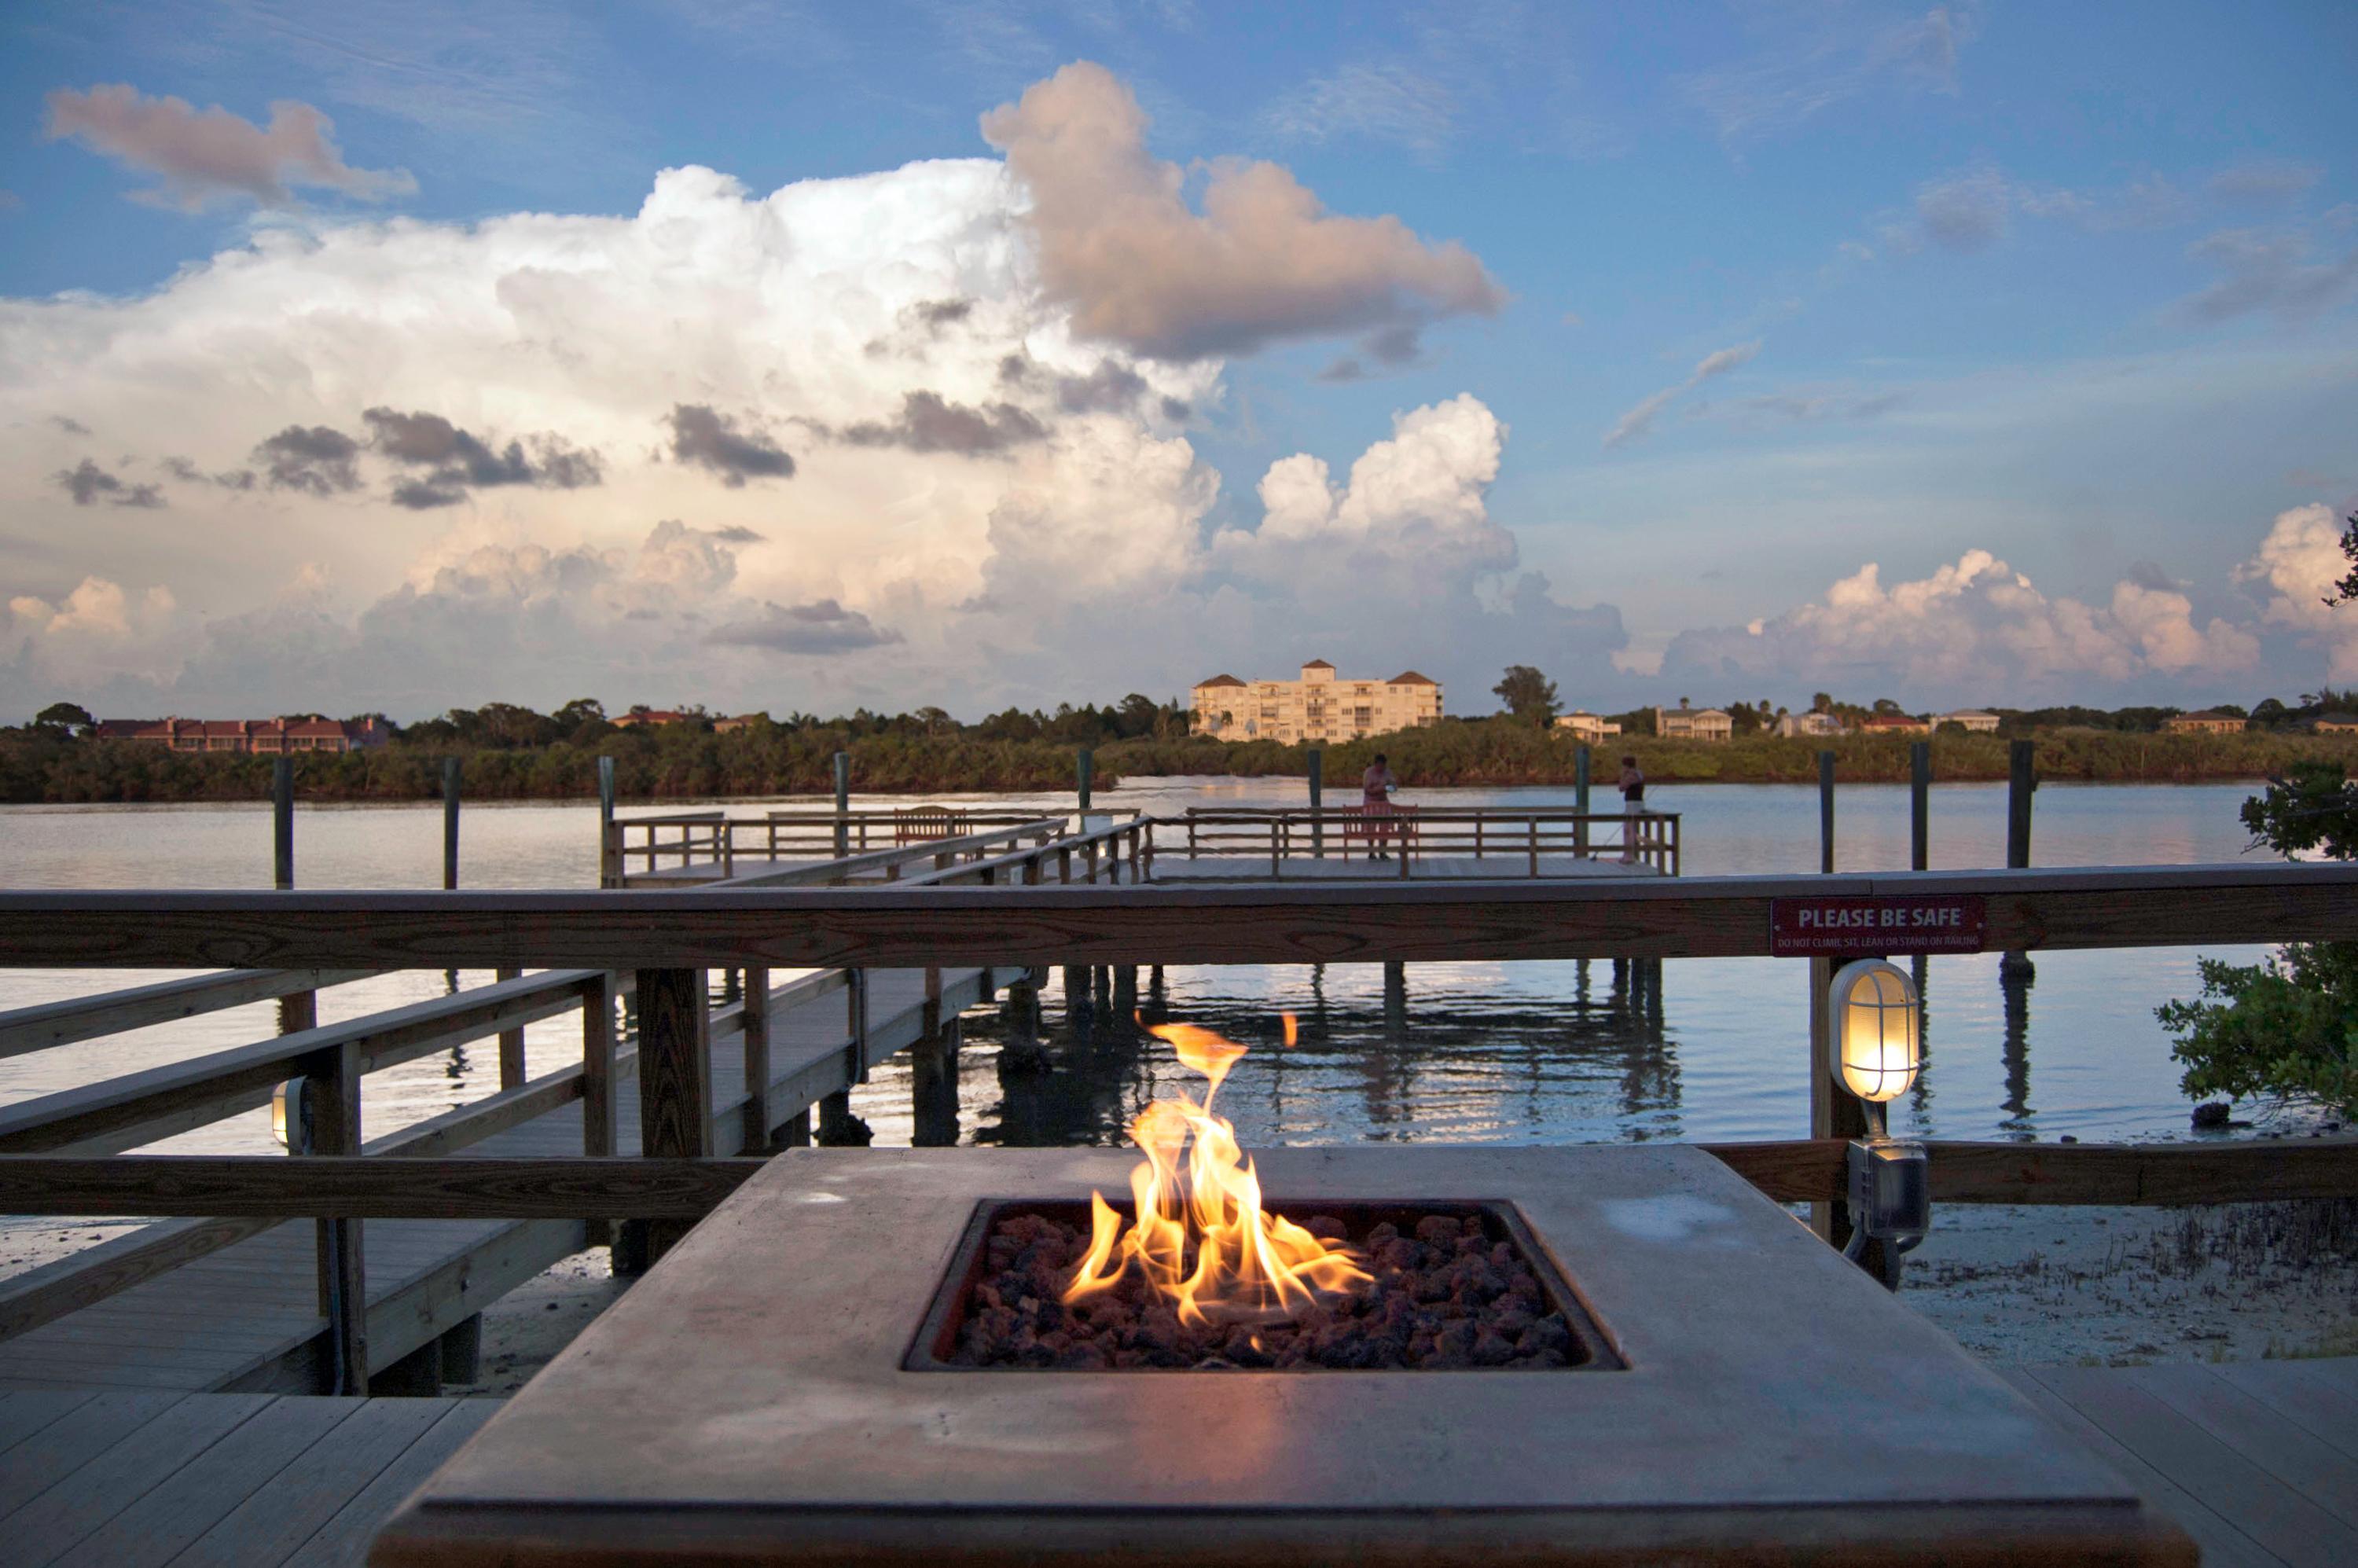 Legacy Vacation Resorts-Indian Shores Clearwater Beach Bagian luar foto